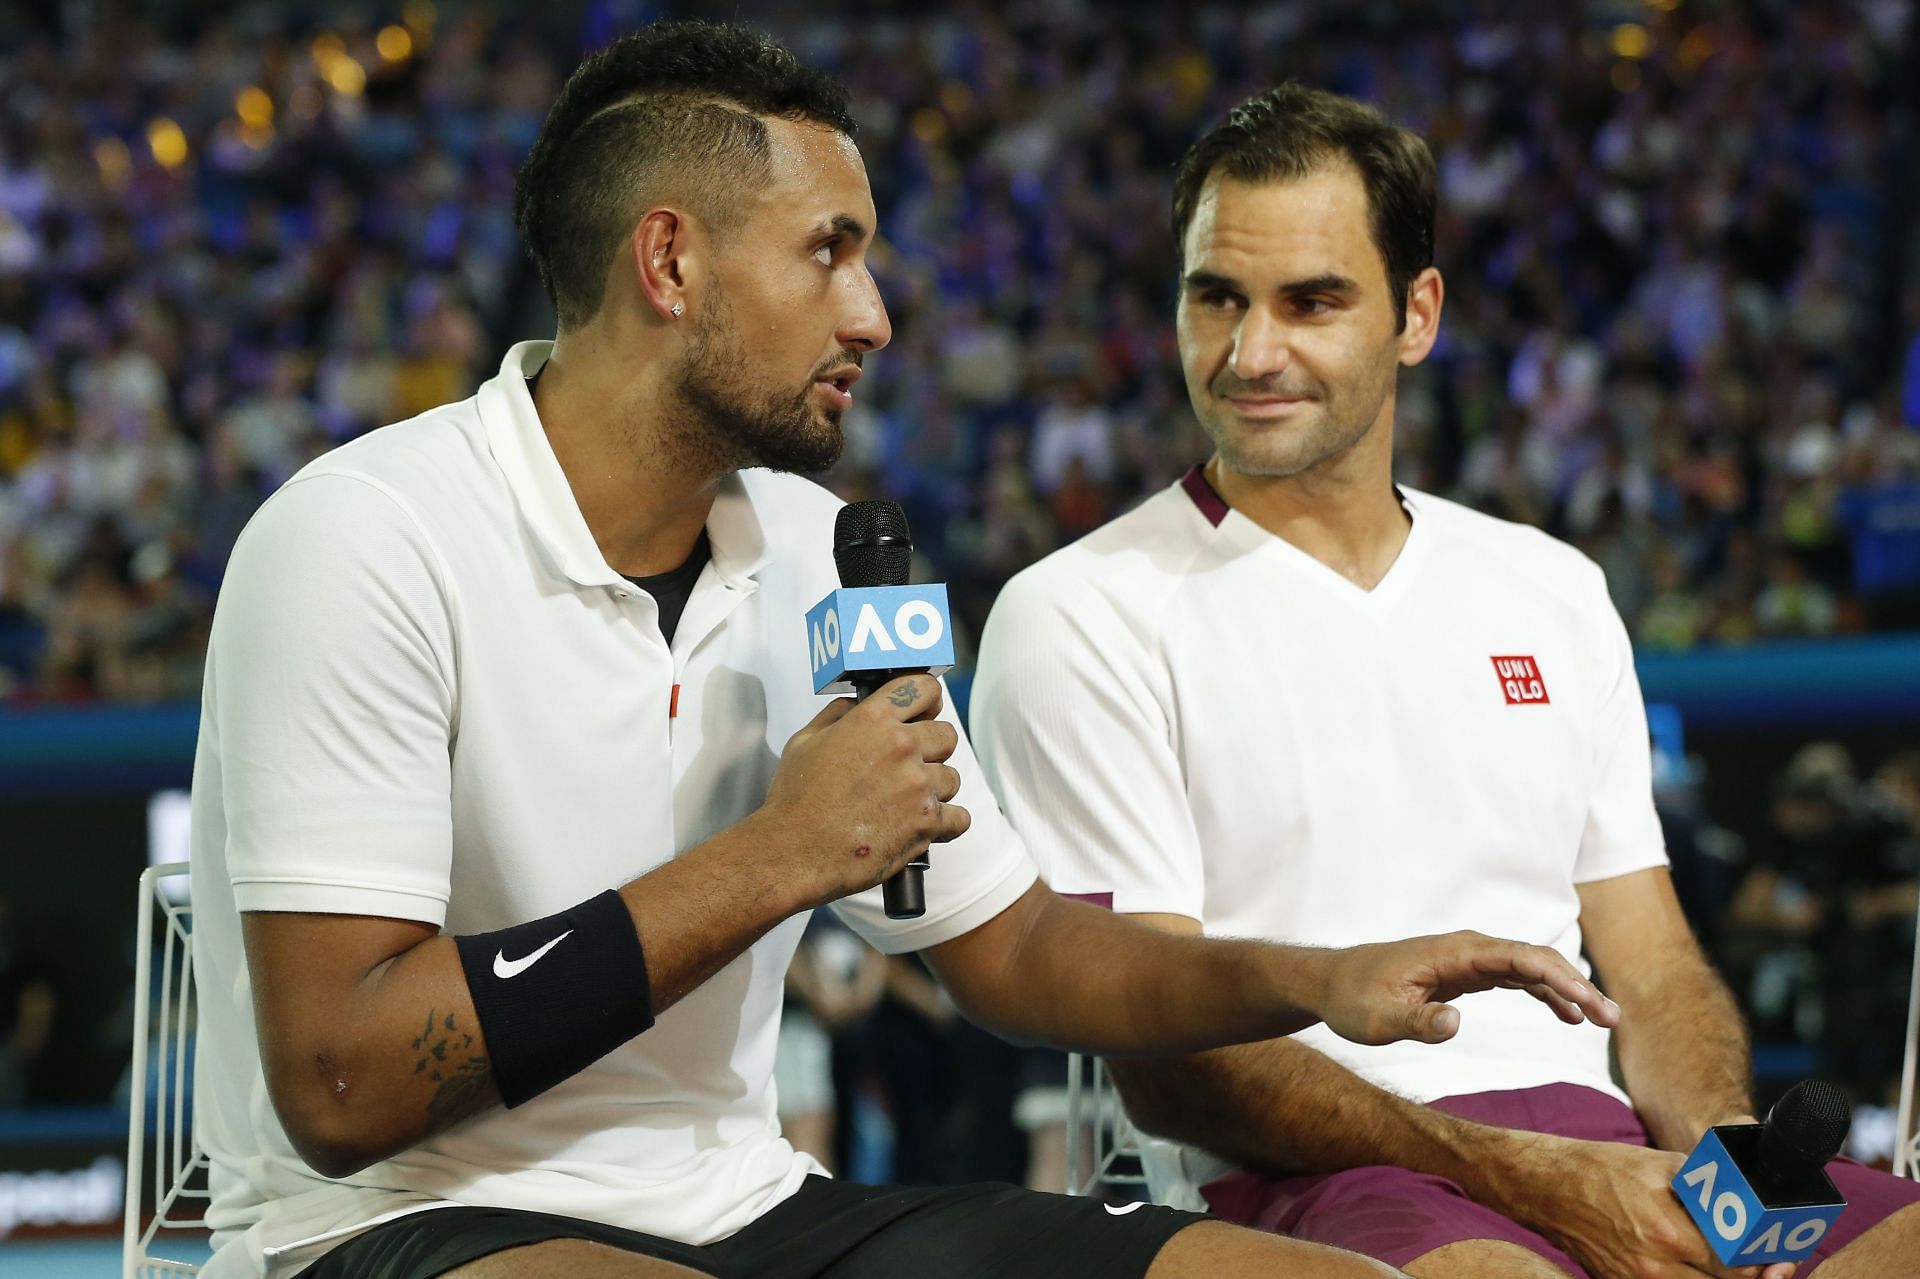 Nick Kyrgios has said that Roger Federer should not be considered in the GOAT debate